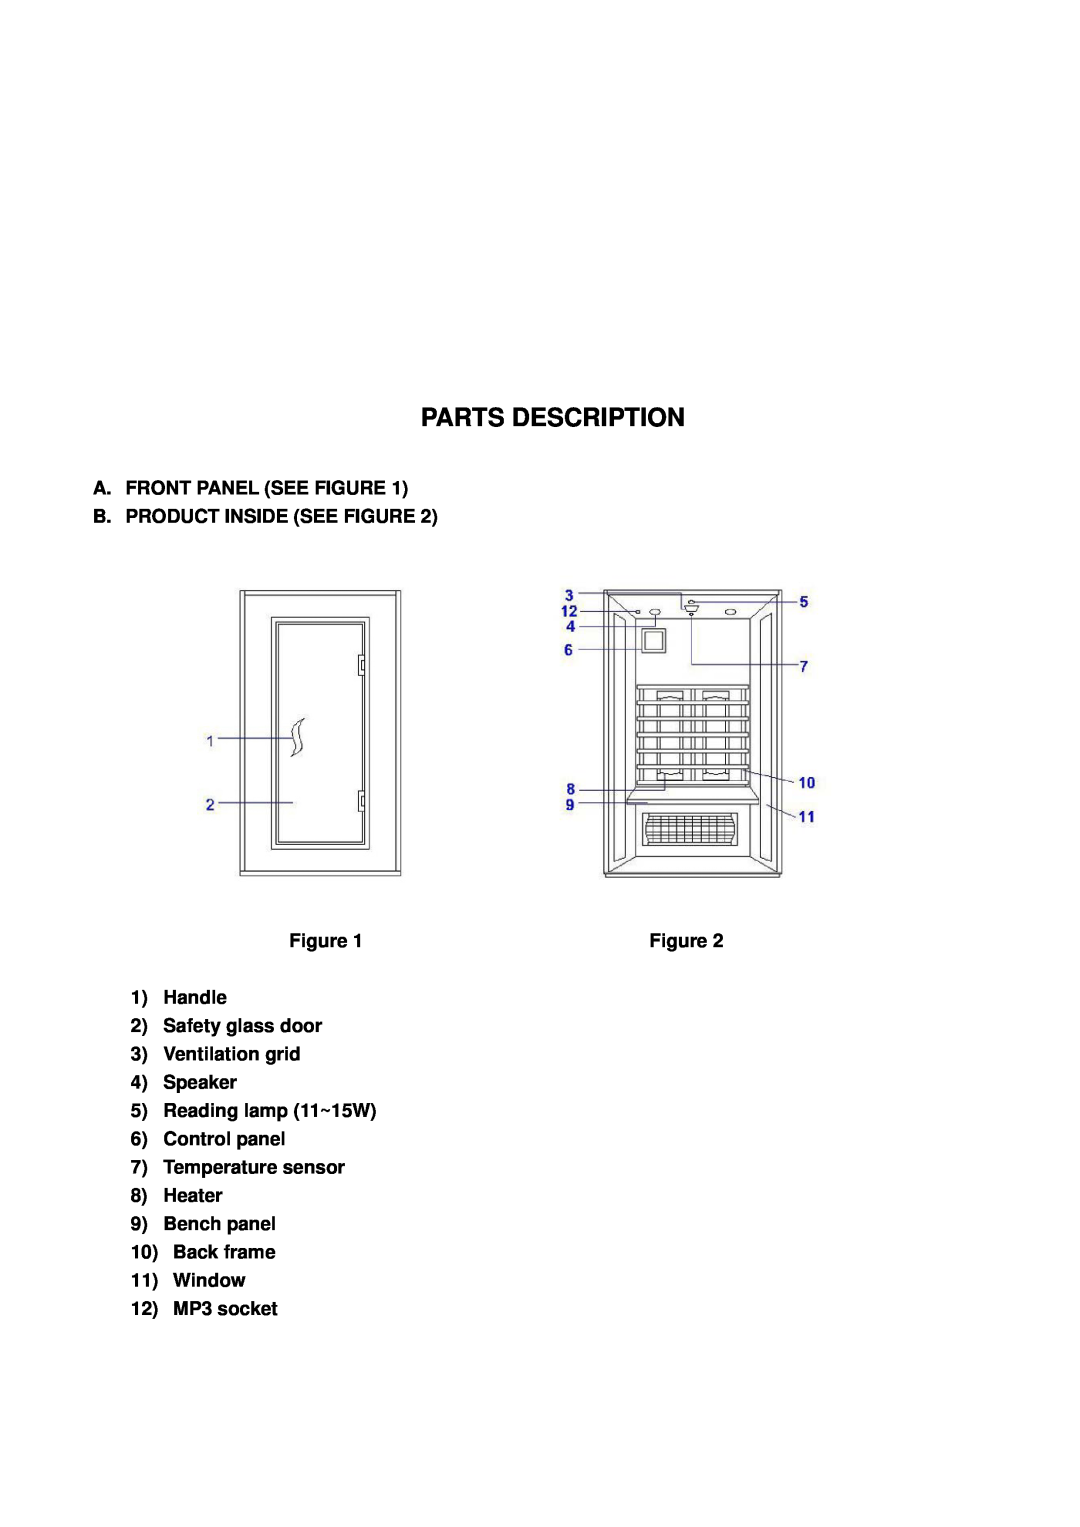 Keys Fitness BS-9101 owner manual Parts Description, A.Front Panel See Figure, B.Product Inside See Figure 